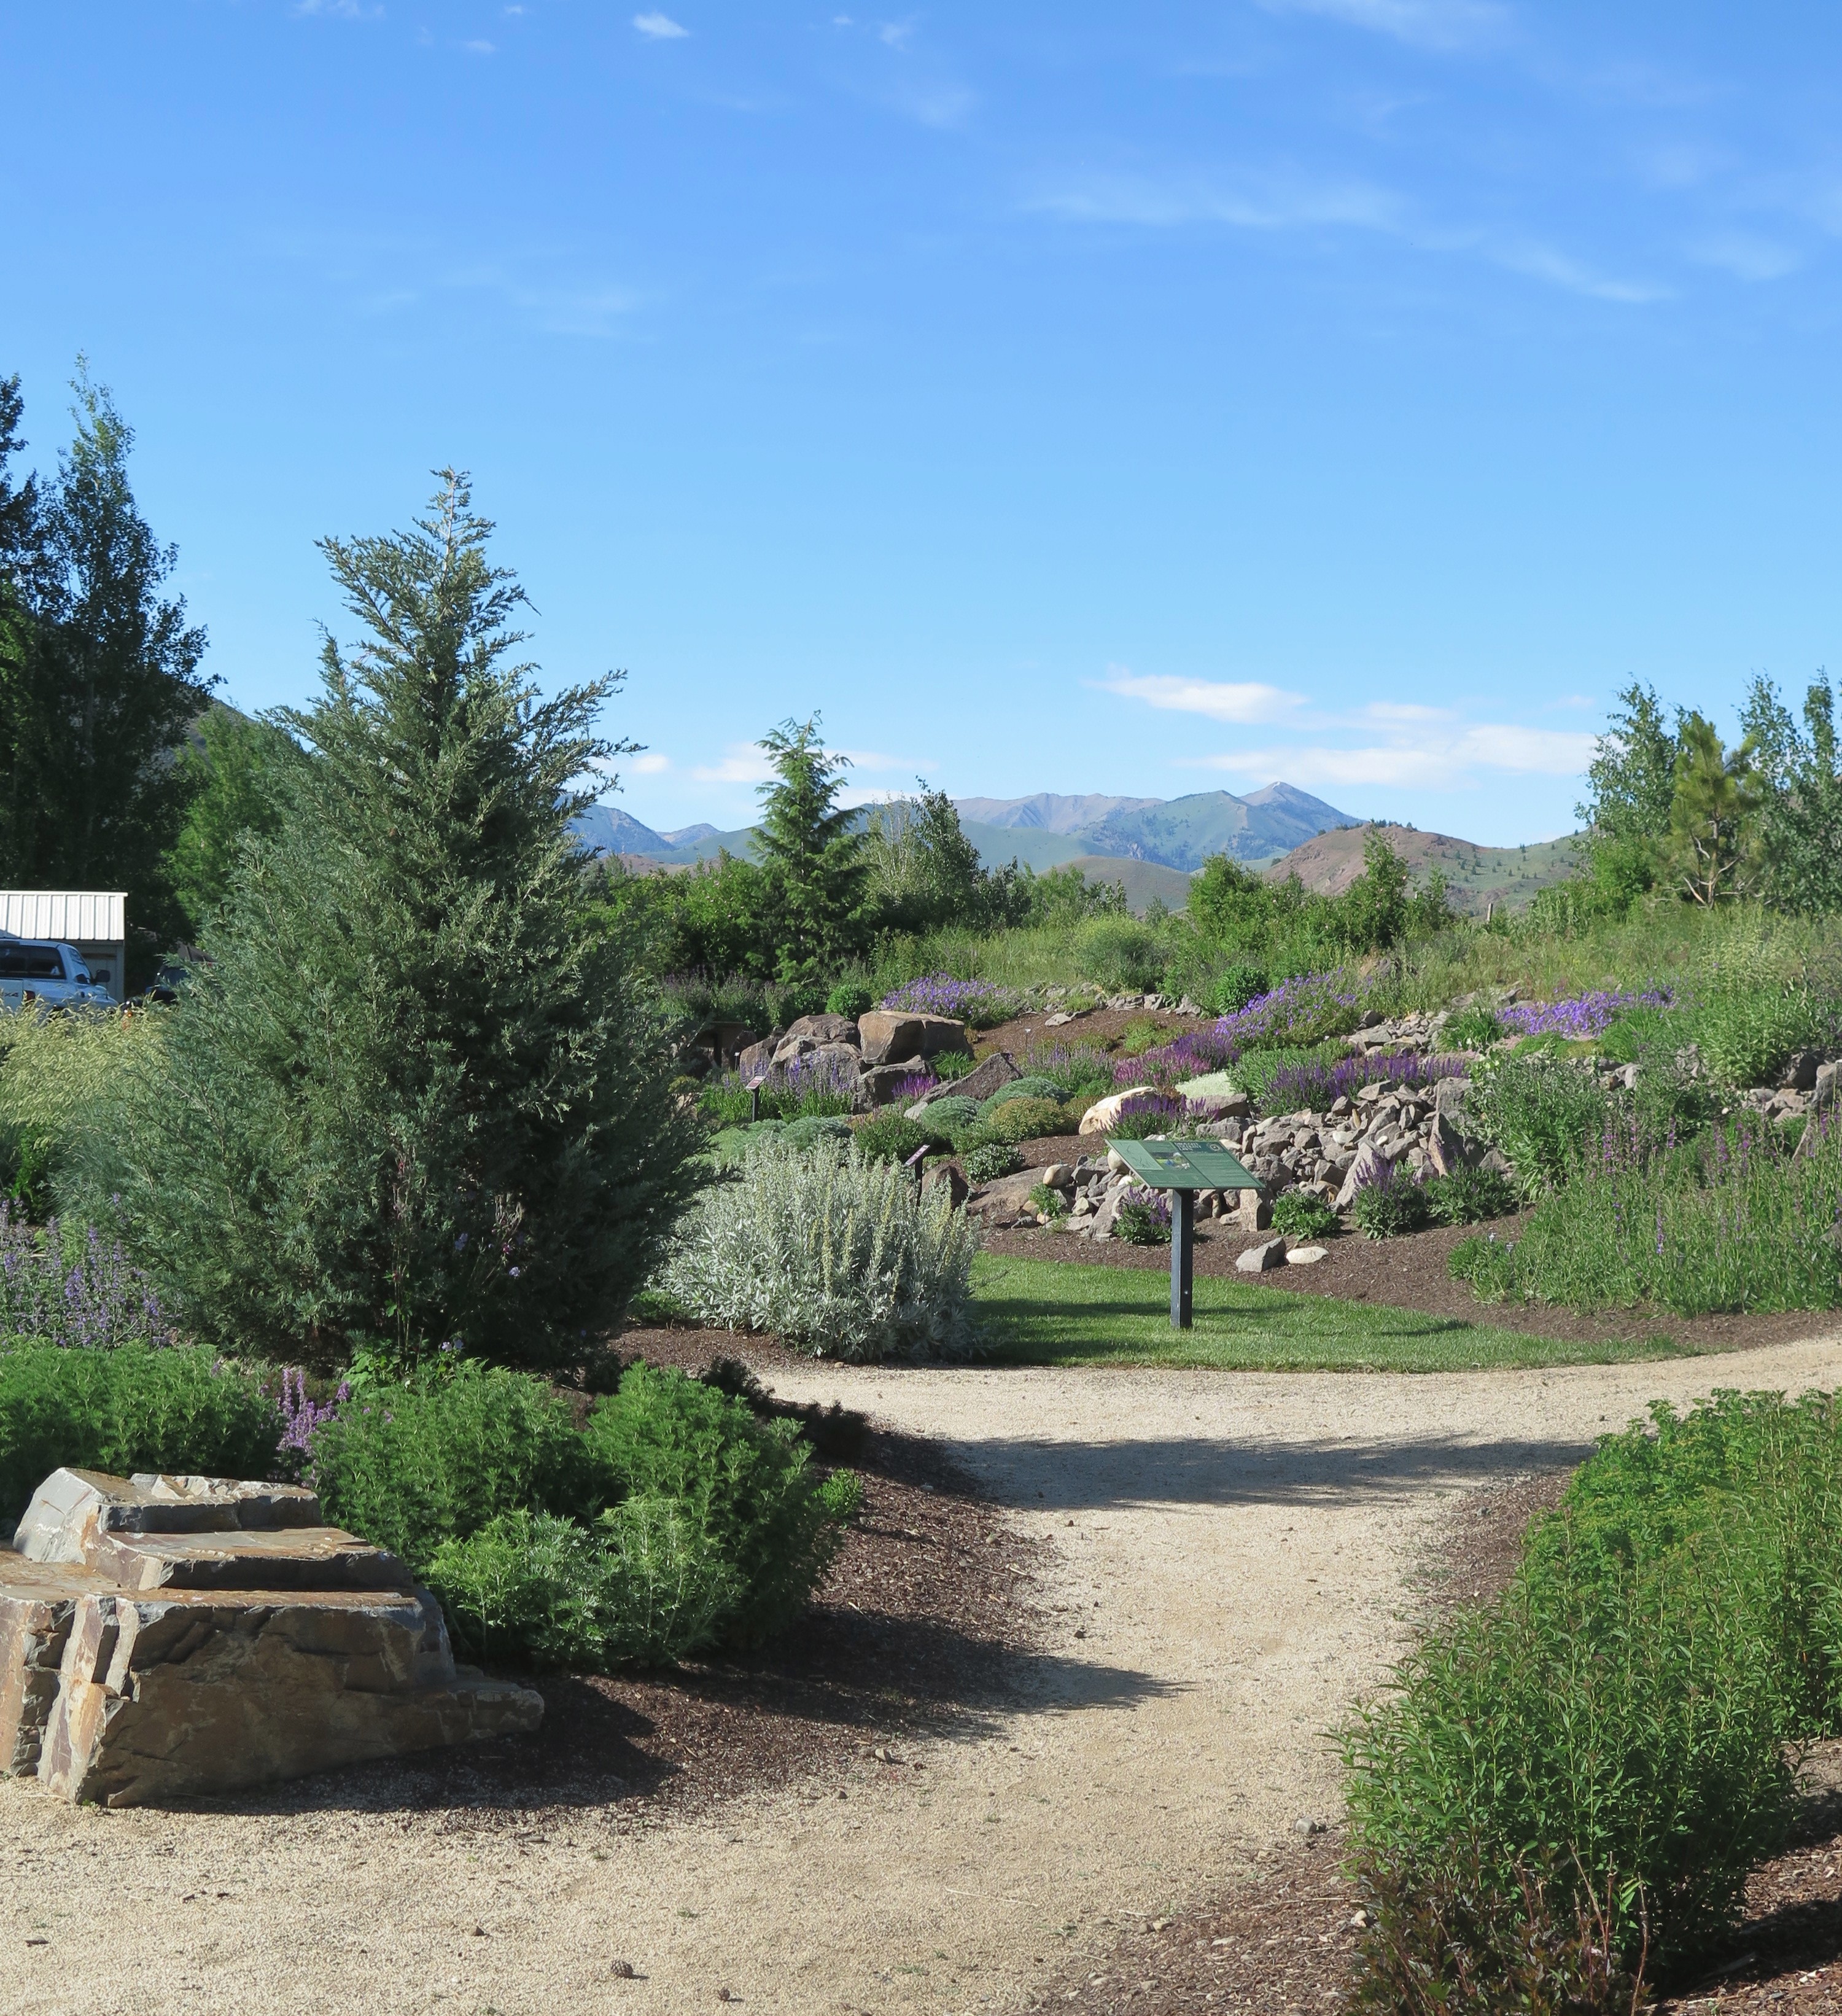 by Laurie Ahern: Solstice Party at the Sawtooth Botanical Garden in Ketchum, ID.